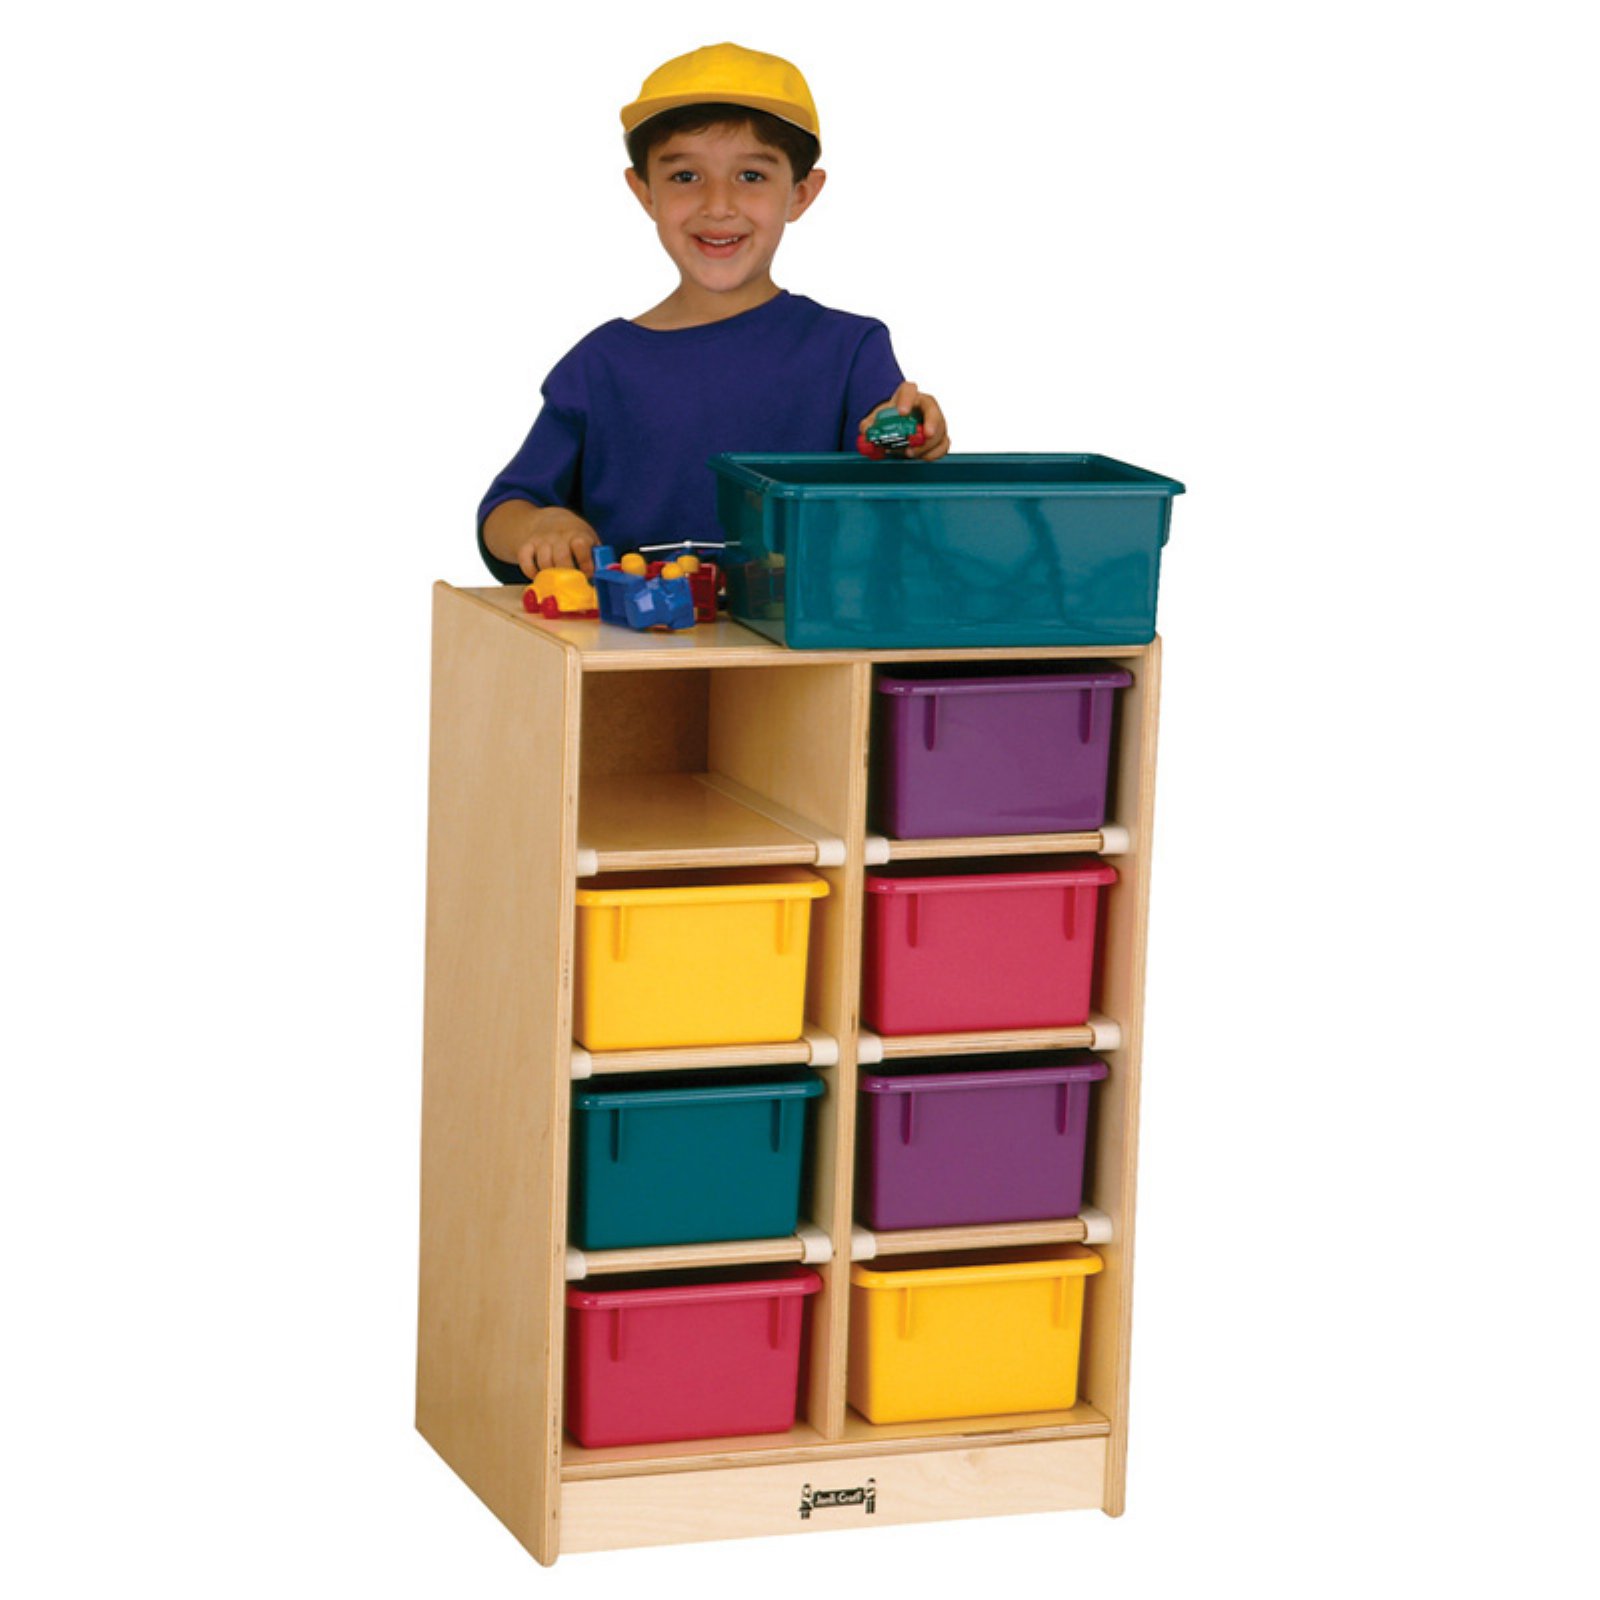 Kydz 10 Tray Mobile Storage Cubbie - image 2 of 3